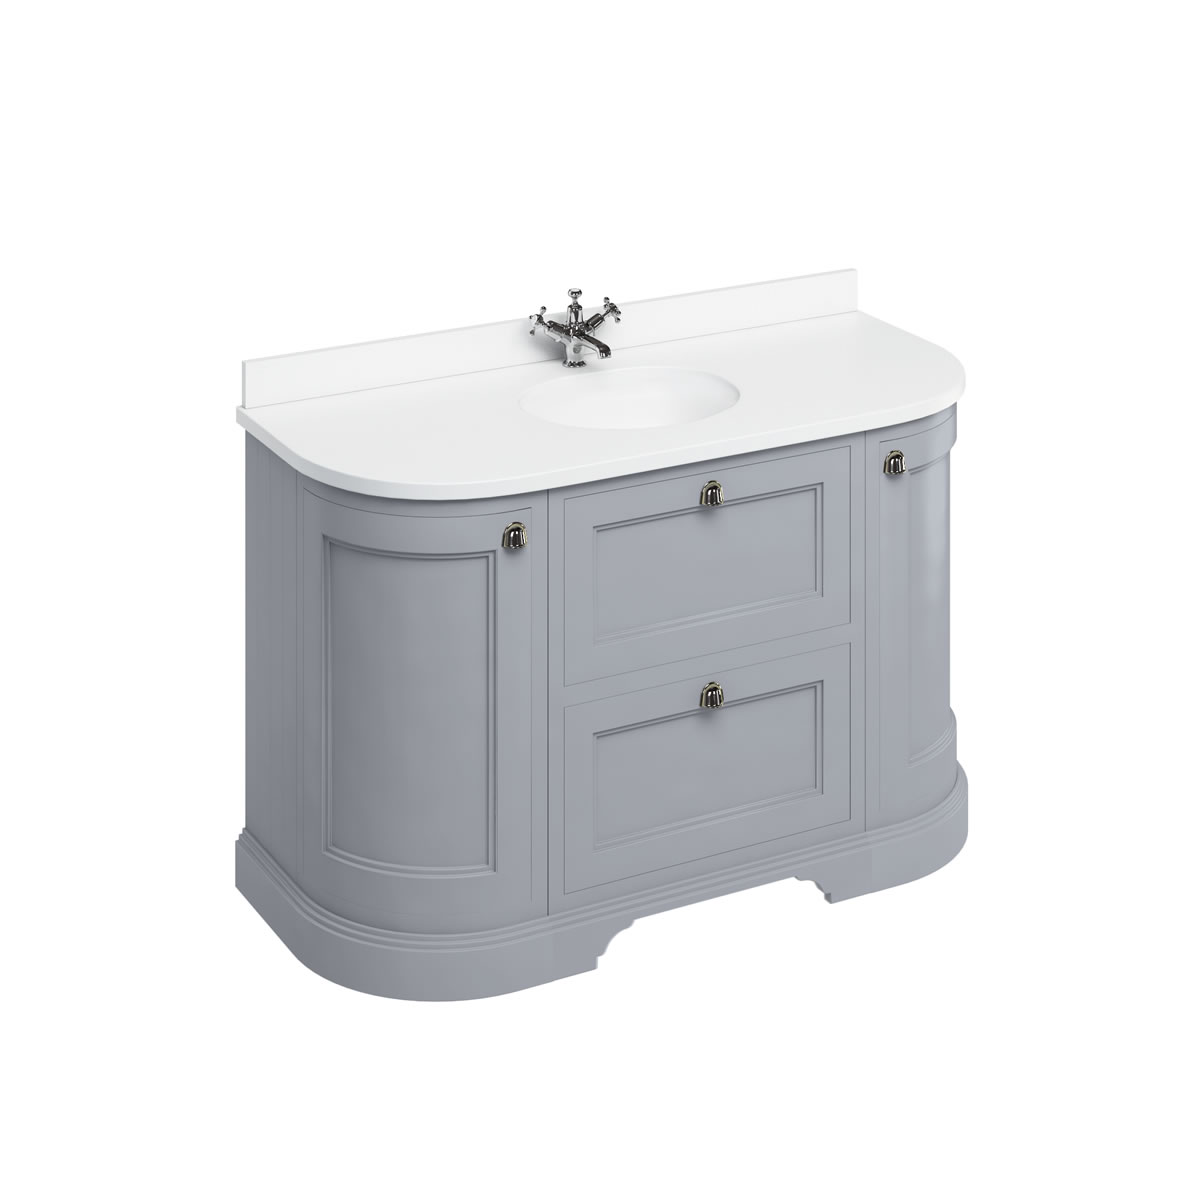 Freestanding 134 Curved Vanity Unit with drawers - Classic Grey and Minerva white worktop with integrated white basin 